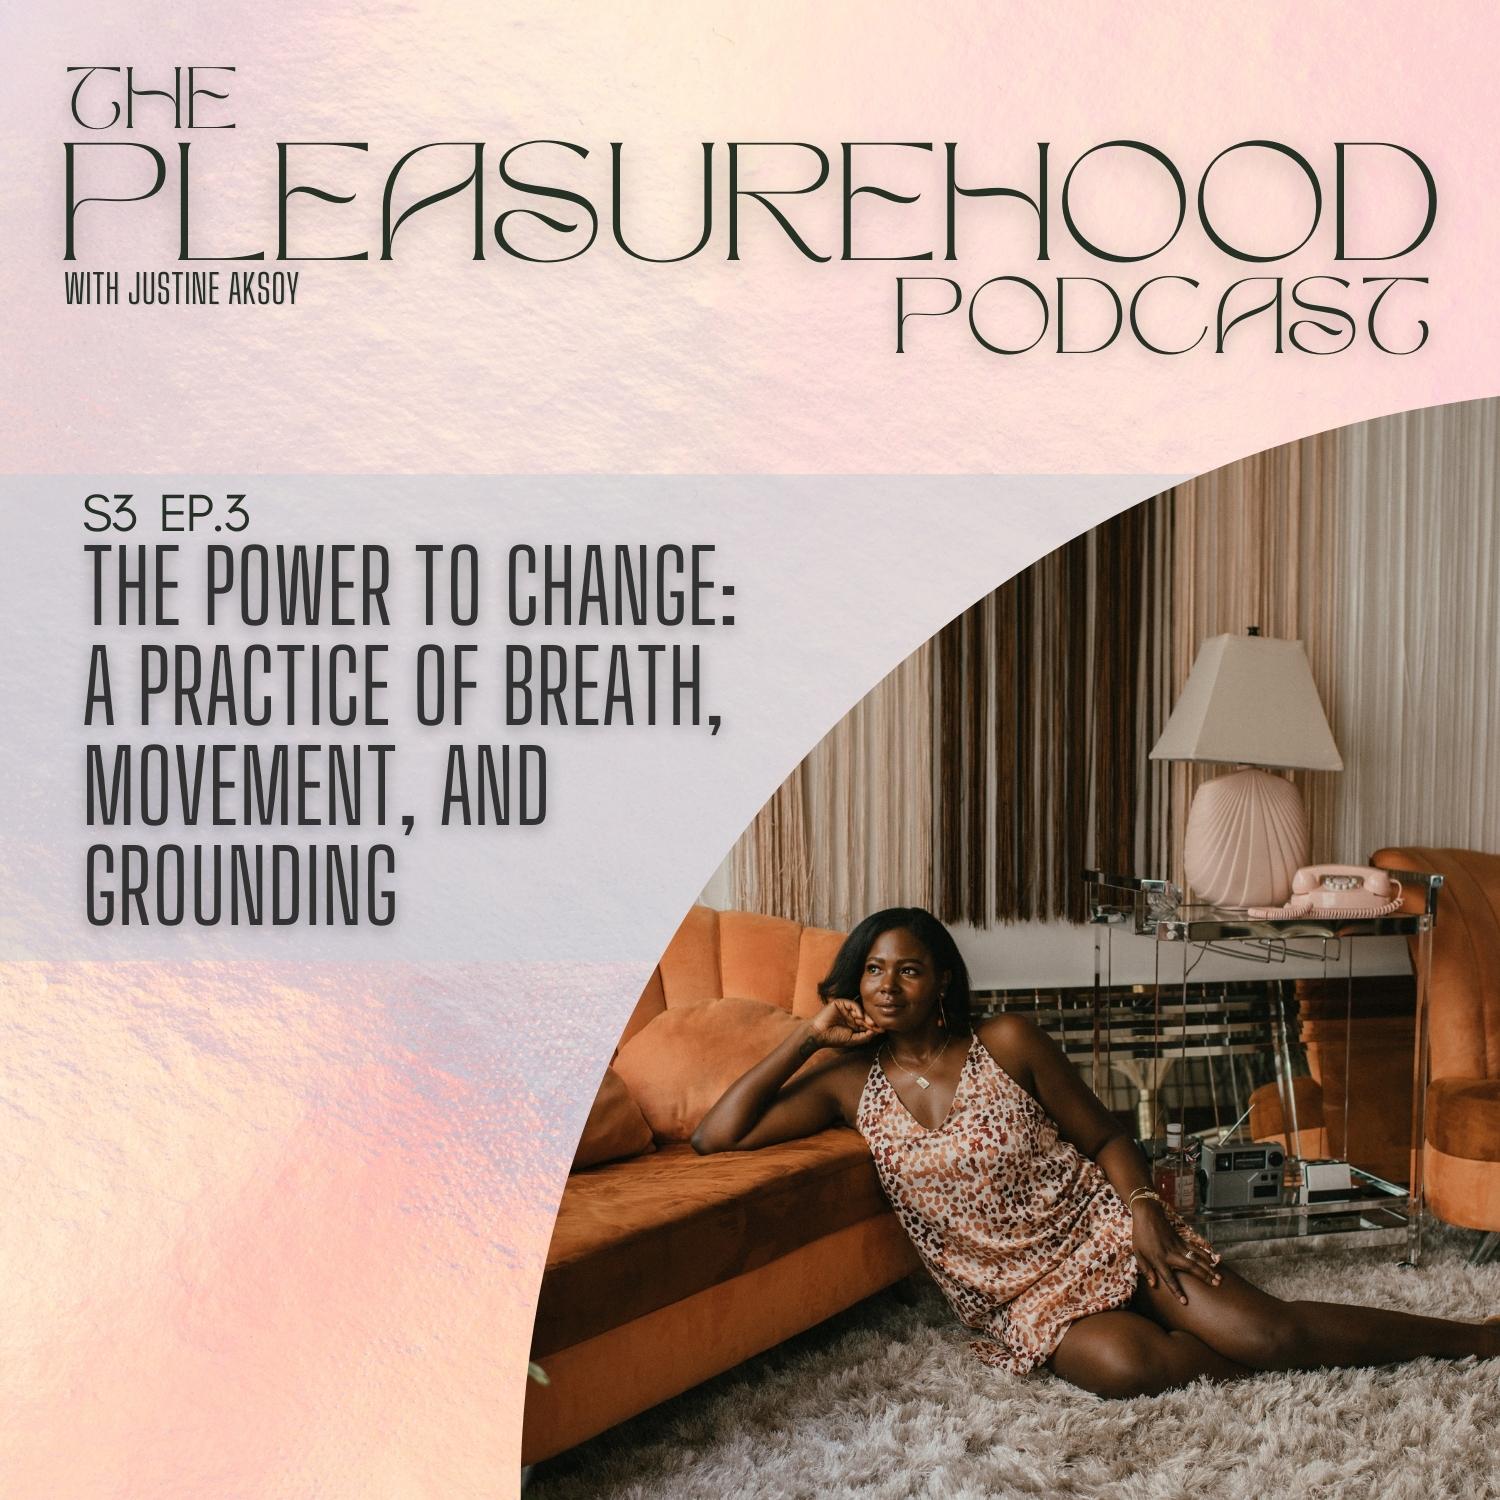 The Power to Change: A Practice of Breath, Movement, and Grounding